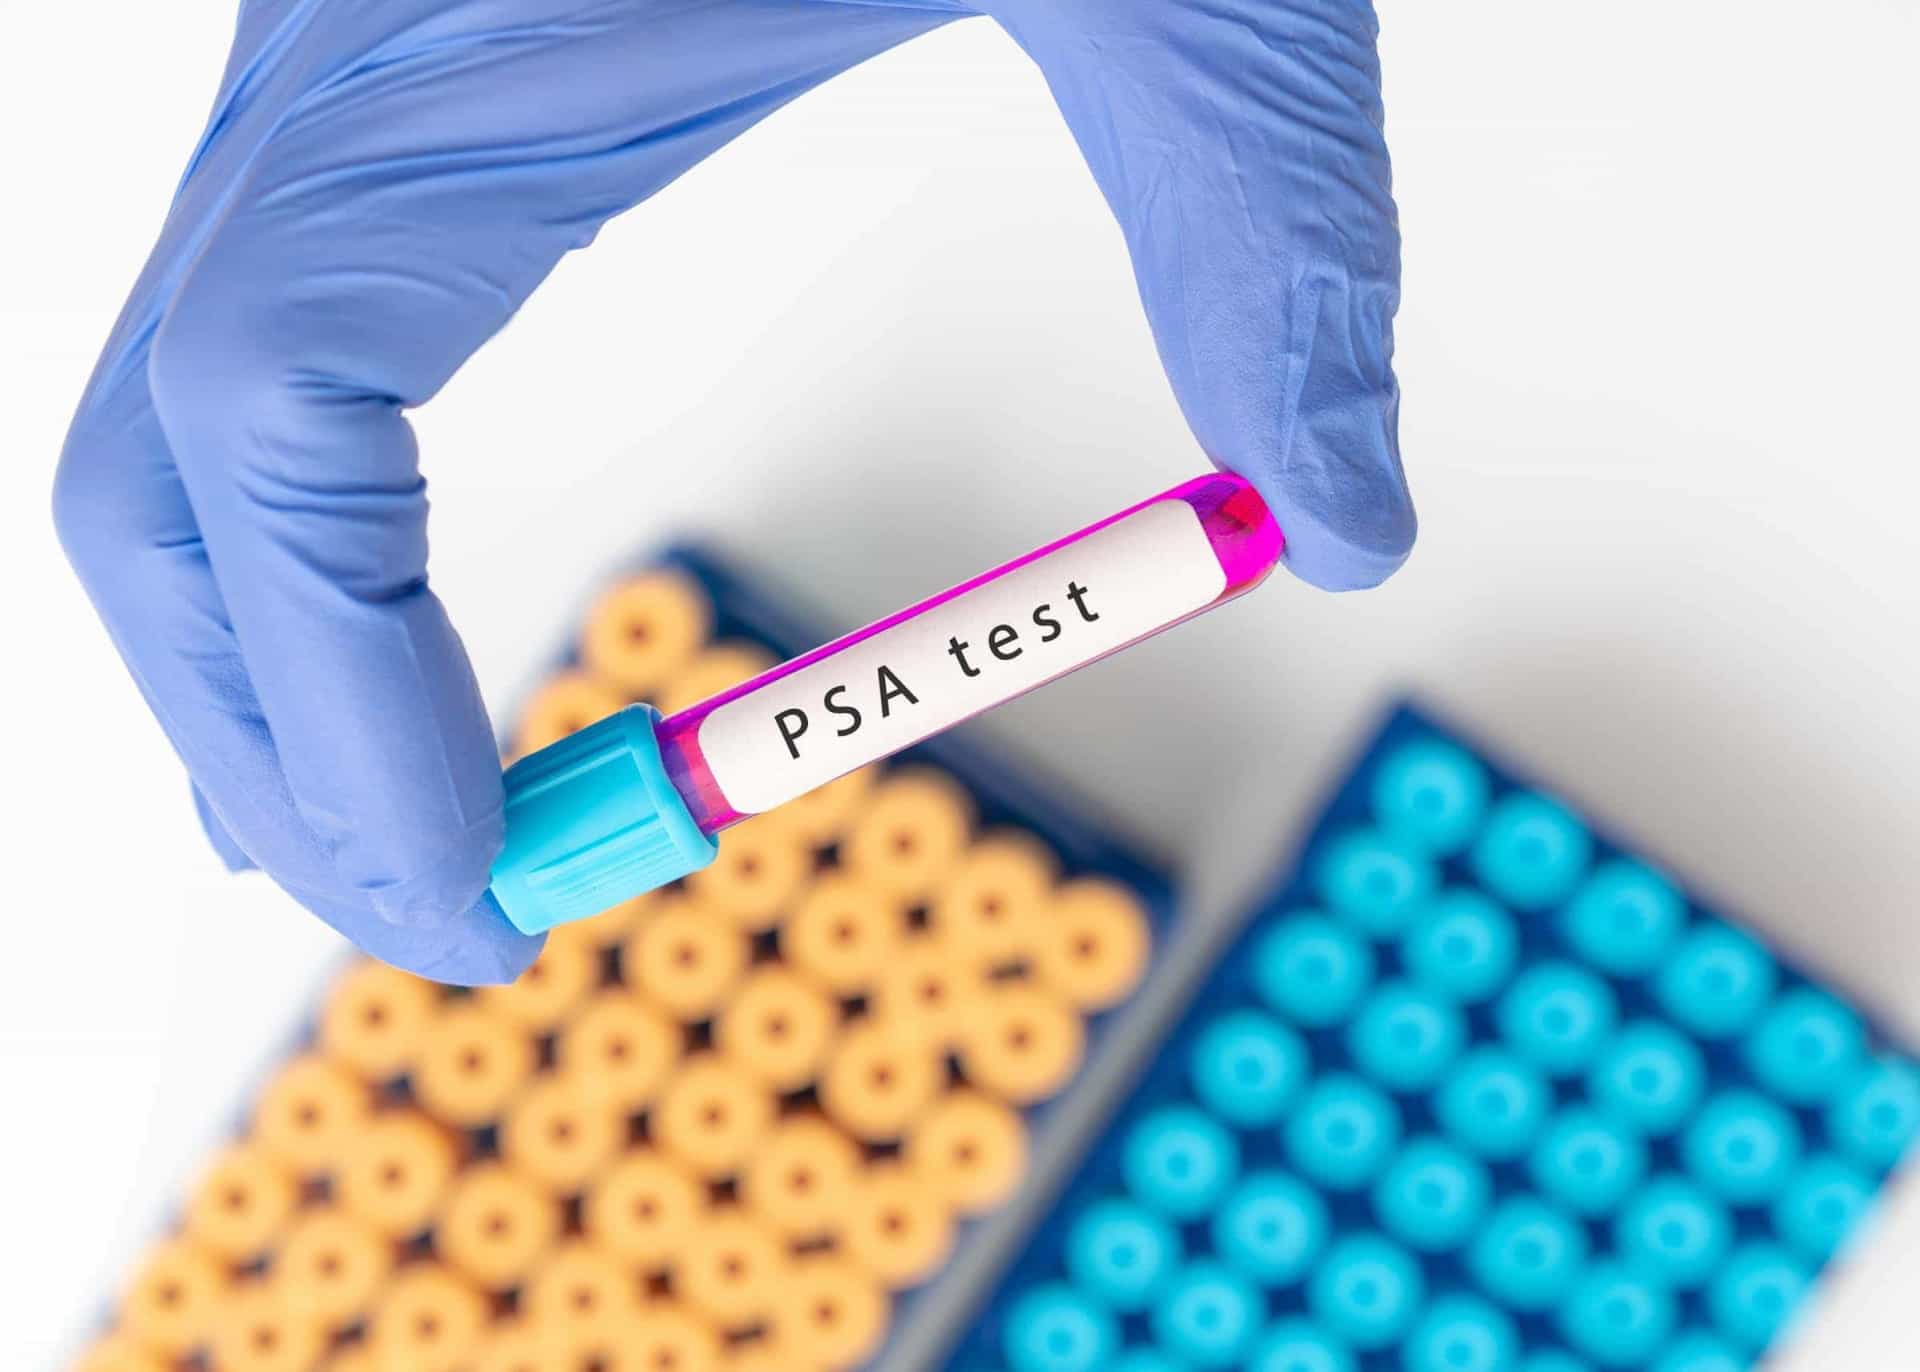 <p>The screening for prostate cancer is usually done in two ways: through a prostate-specific antigen (PSA) blood test, and using a digital rectal exam.</p><p>You may also like:<a href="https://www.starsinsider.com/n/468124?utm_source=msn.com&utm_medium=display&utm_campaign=referral_description&utm_content=516289en-en"> Celebs give their thoughts on the keto diet</a></p>